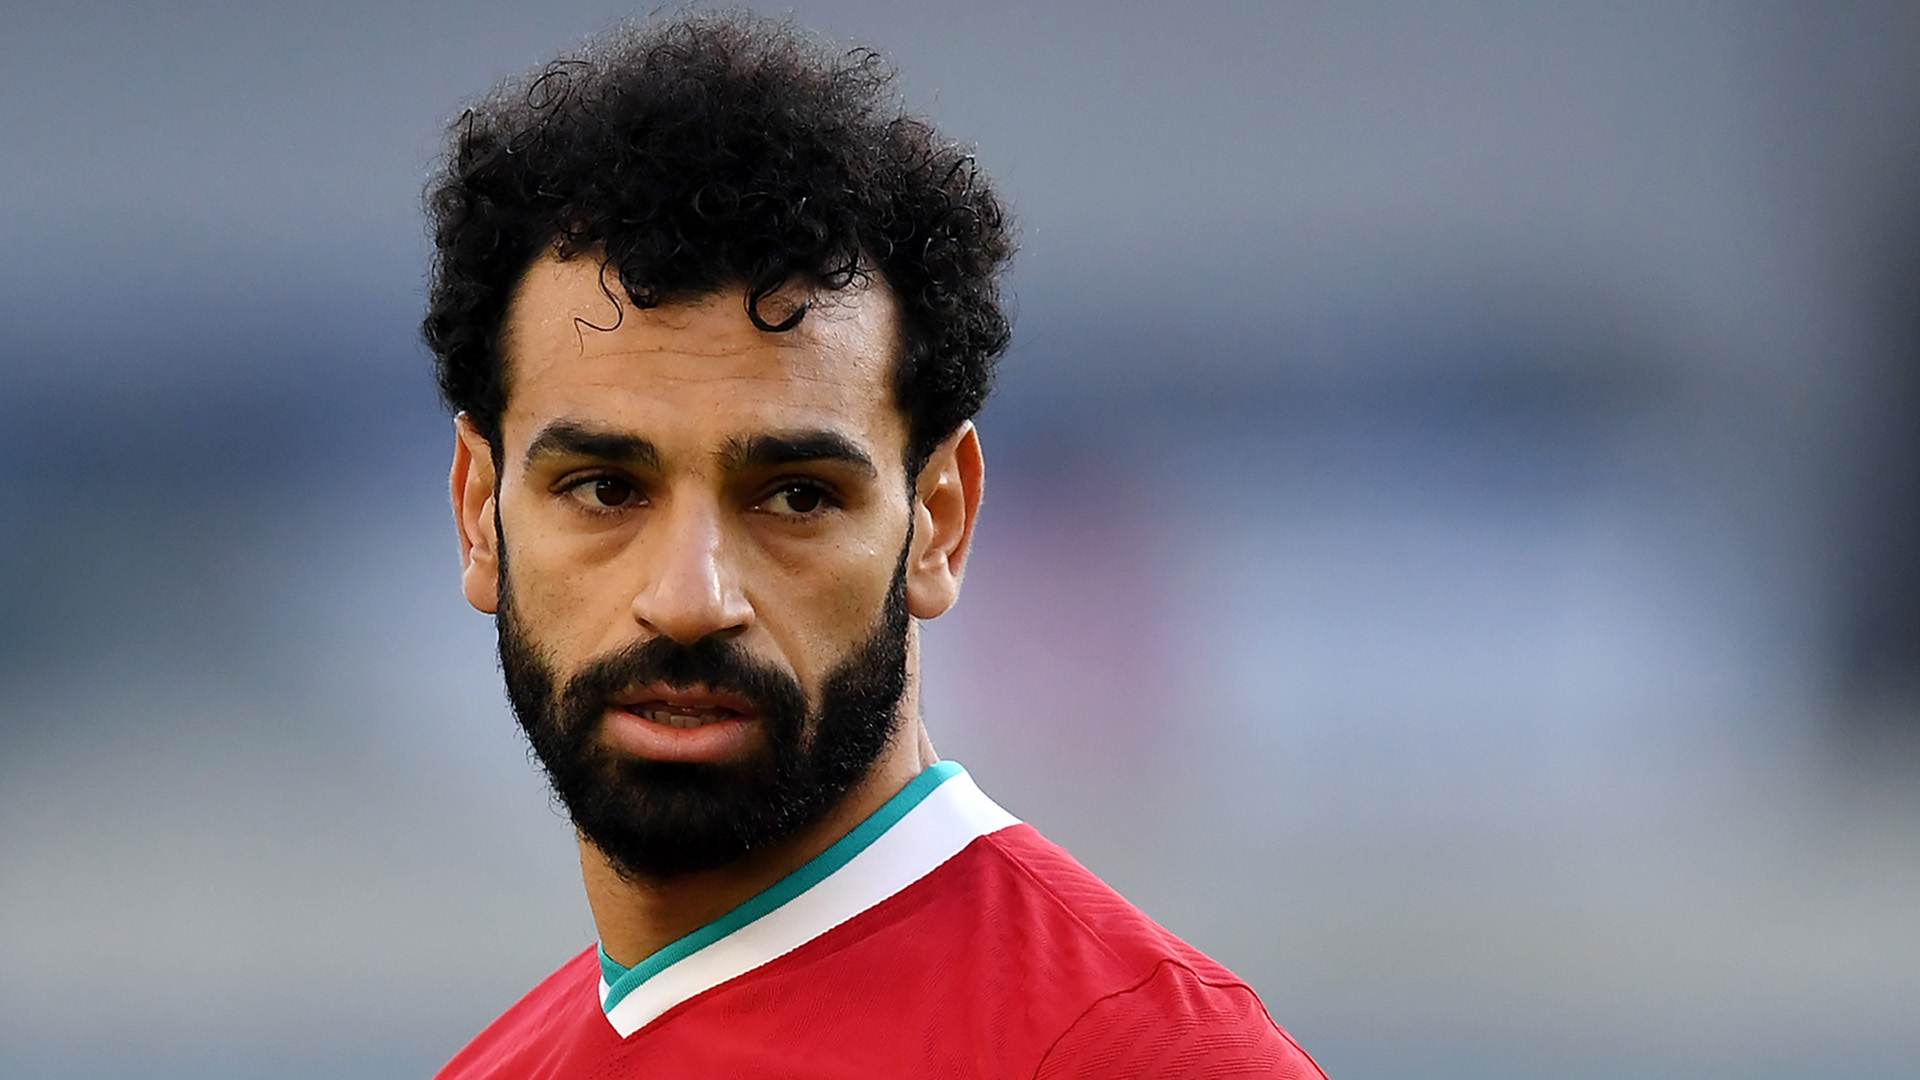 Salah benched after Liverpool star admits to being 'very disappointed' by Klopp decision not to name him captain